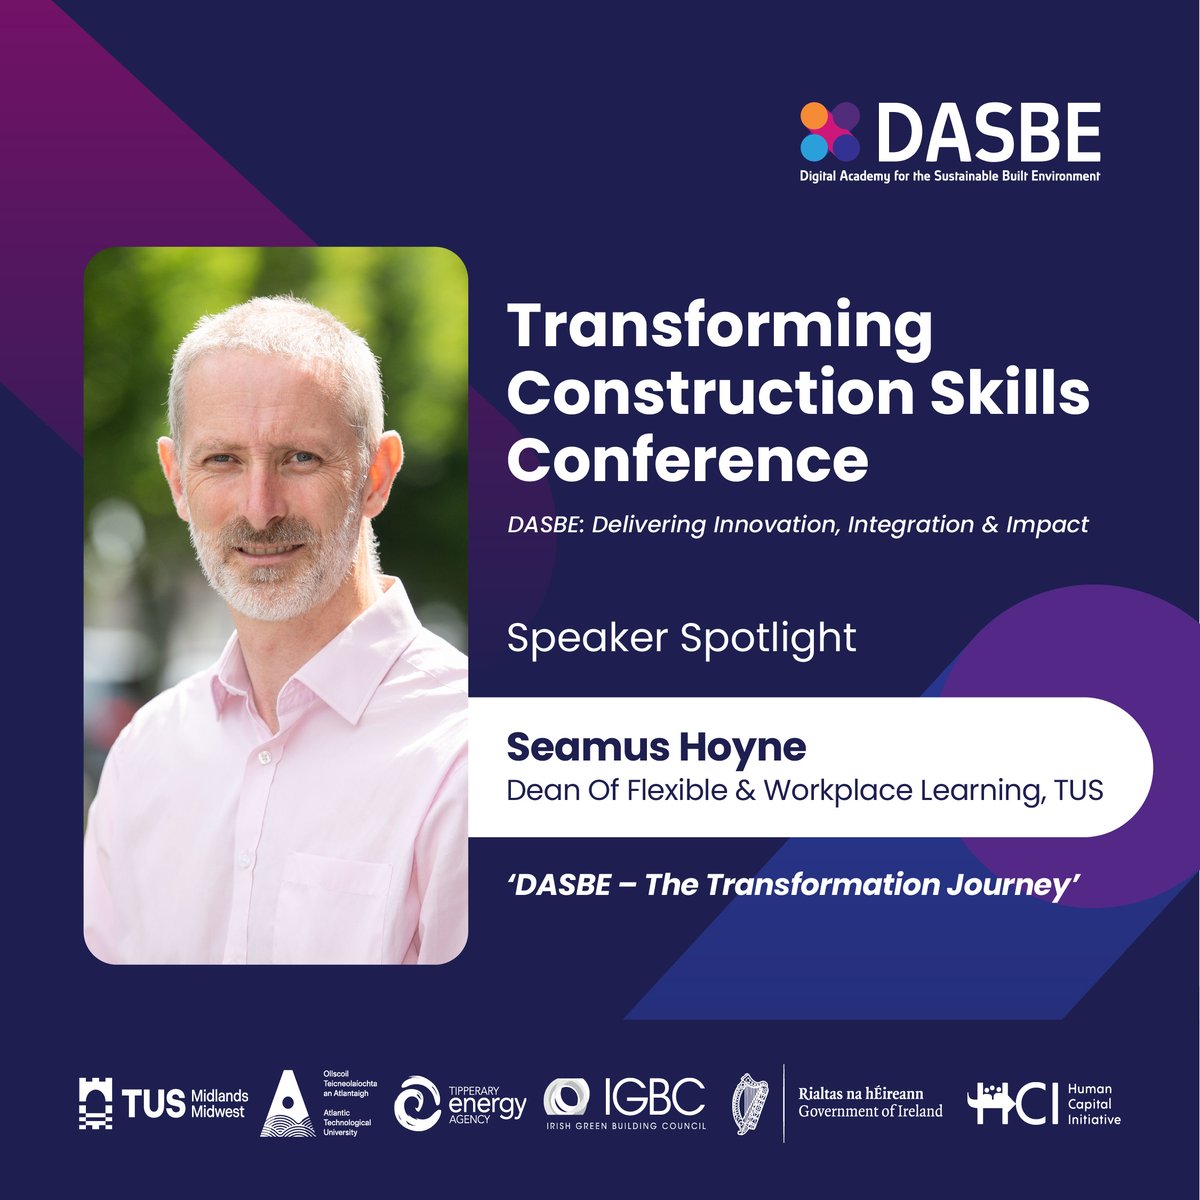 Tomorrow, the 9th May, the Transforming Construction Skills Conference organised by DASBE will take place at the Midlands Park Hotel, Portlaoise. Register your attendance here at dasbe.ie/transforming-c… @tippenergy @DASBE_Irl @IrishGBC